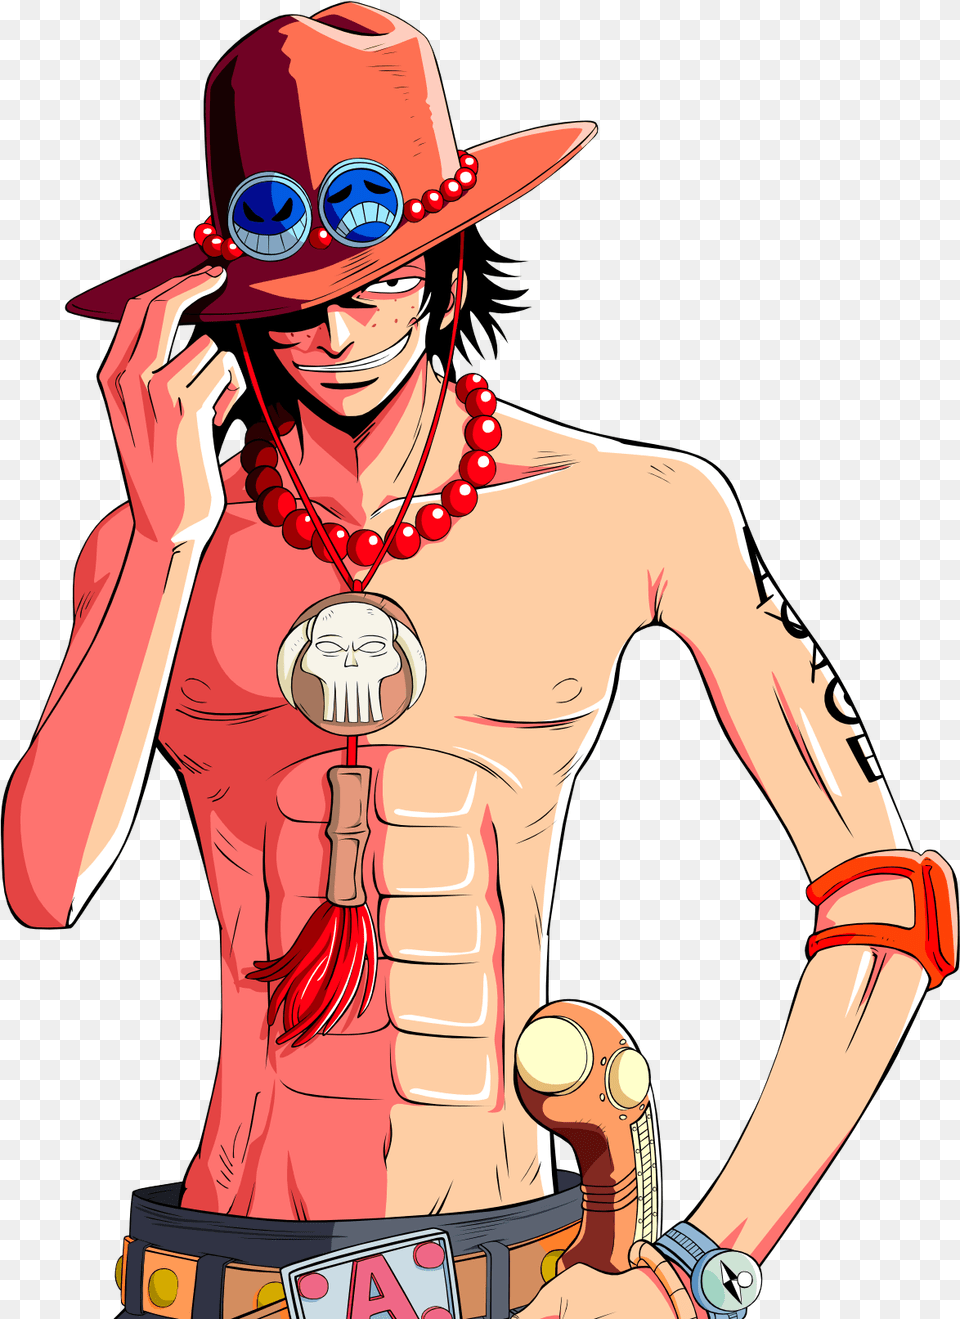 Dbx Fanon Wikia One Piece Ace, Publication, Book, Clothing, Comics Png Image